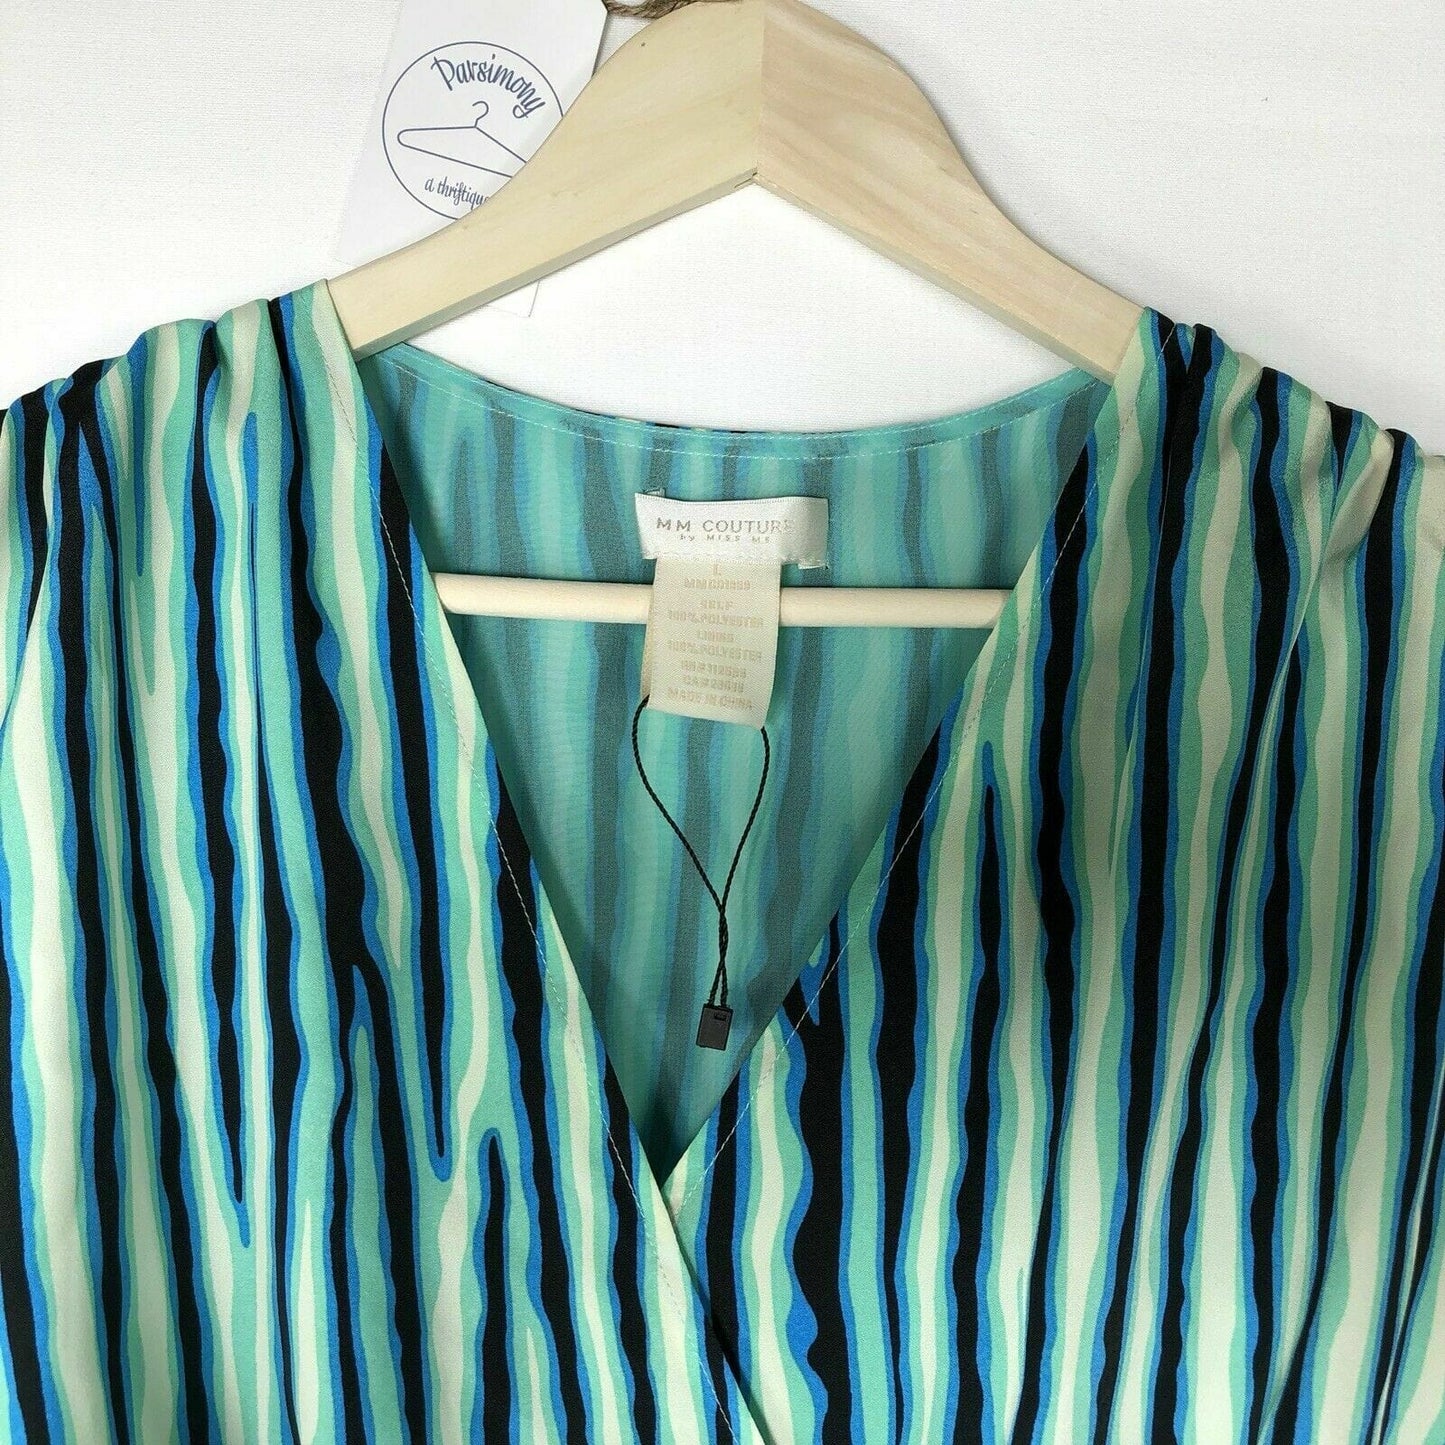 MM Couture by Miss Me Women’s Striped Sleeveless Faux Wrap Dress Size L NWOT